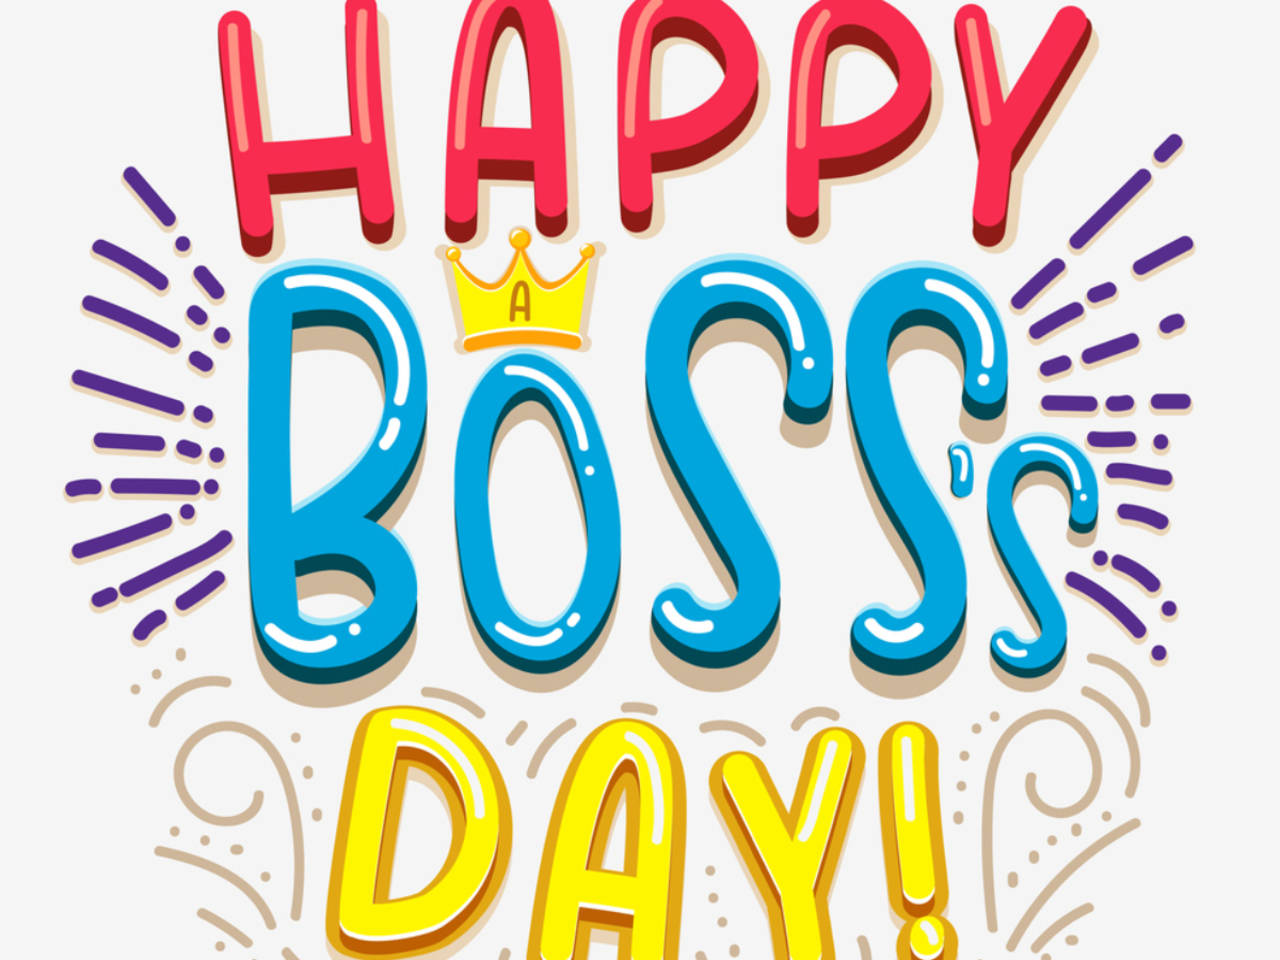 Boss Day Wishes - Happy Boss's Day 2020: Wishes, Messages, Quotes ...